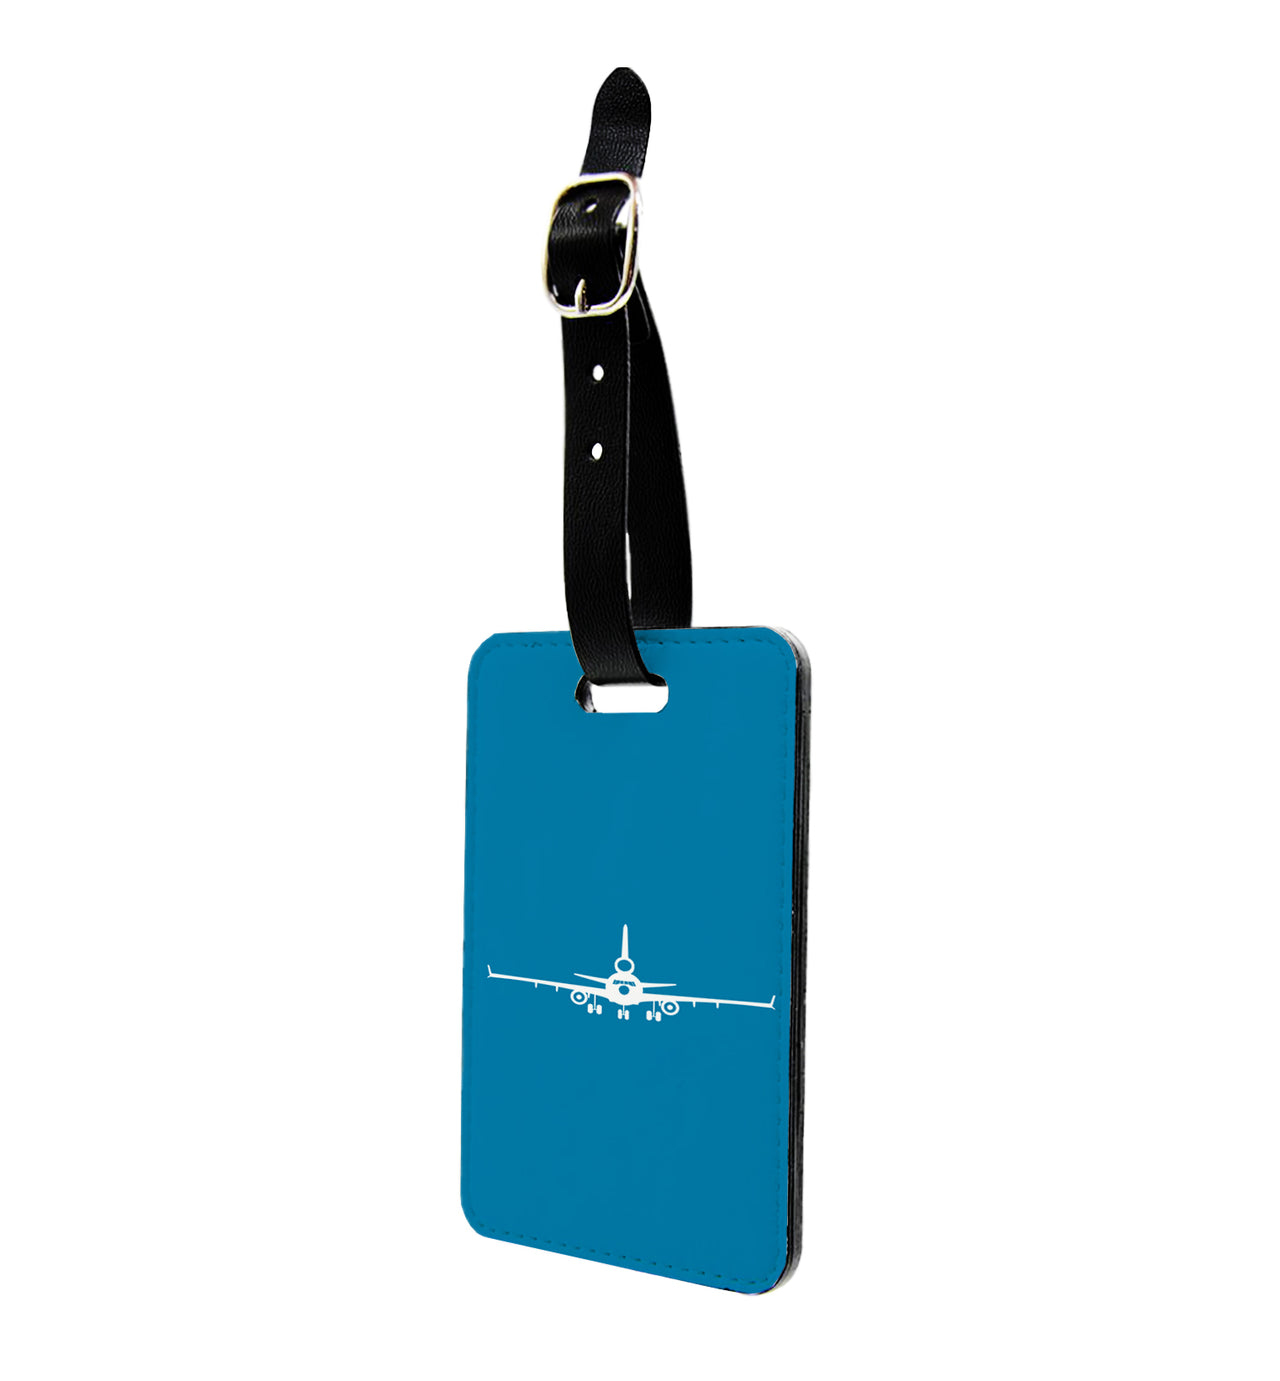 McDonnell Douglas MD-11 Silhouette Plane Designed Luggage Tag